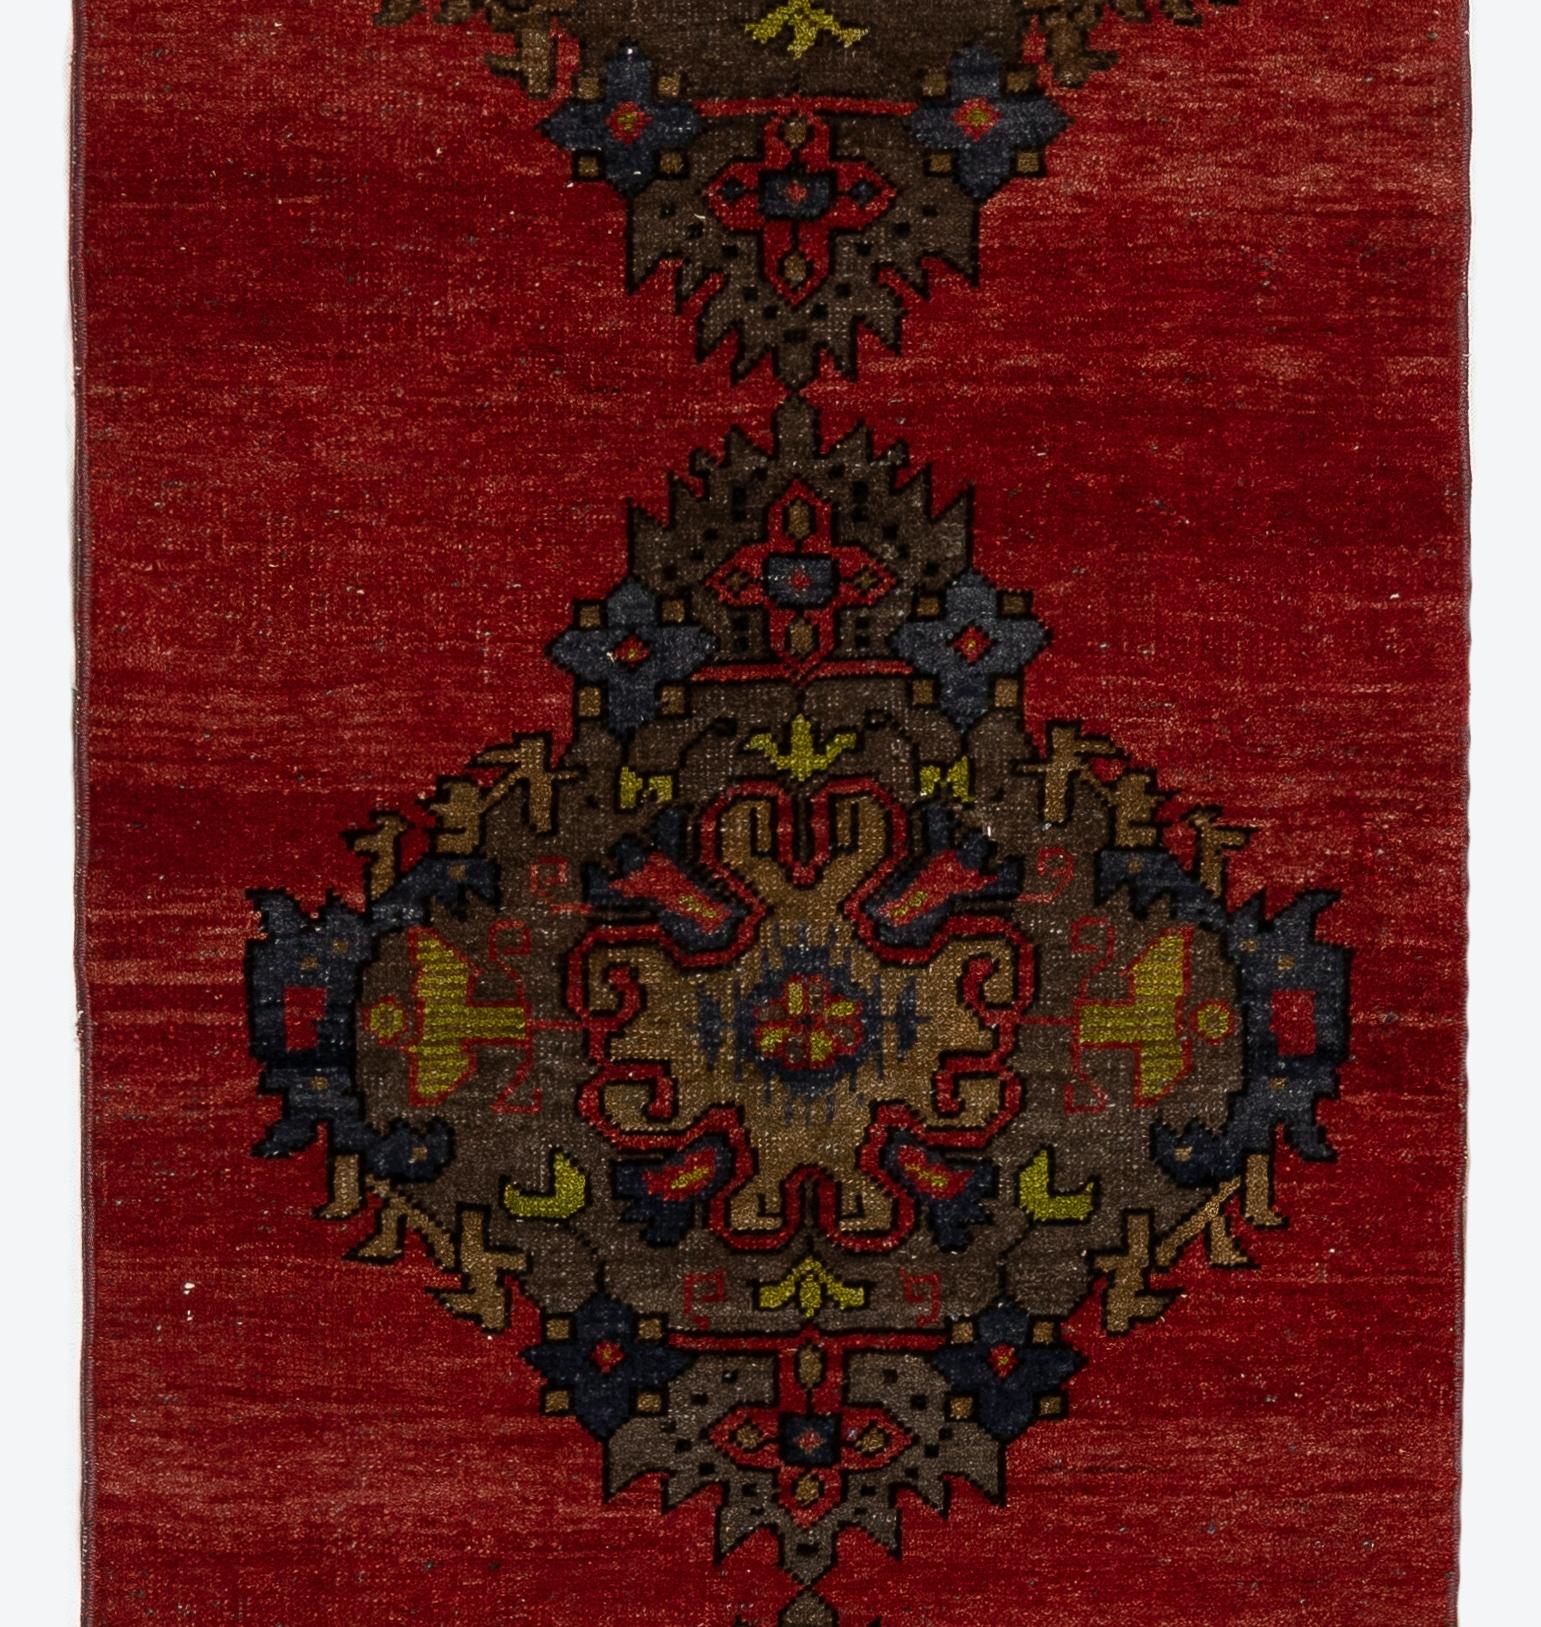 A vintage Turkish runner rug in red color. It was hand-knotted in the 1960s with even medium wool pile on wool foundation and features a multiple medallion design. It is in very good condition, professionally-washed, sturdy and suitable for areas